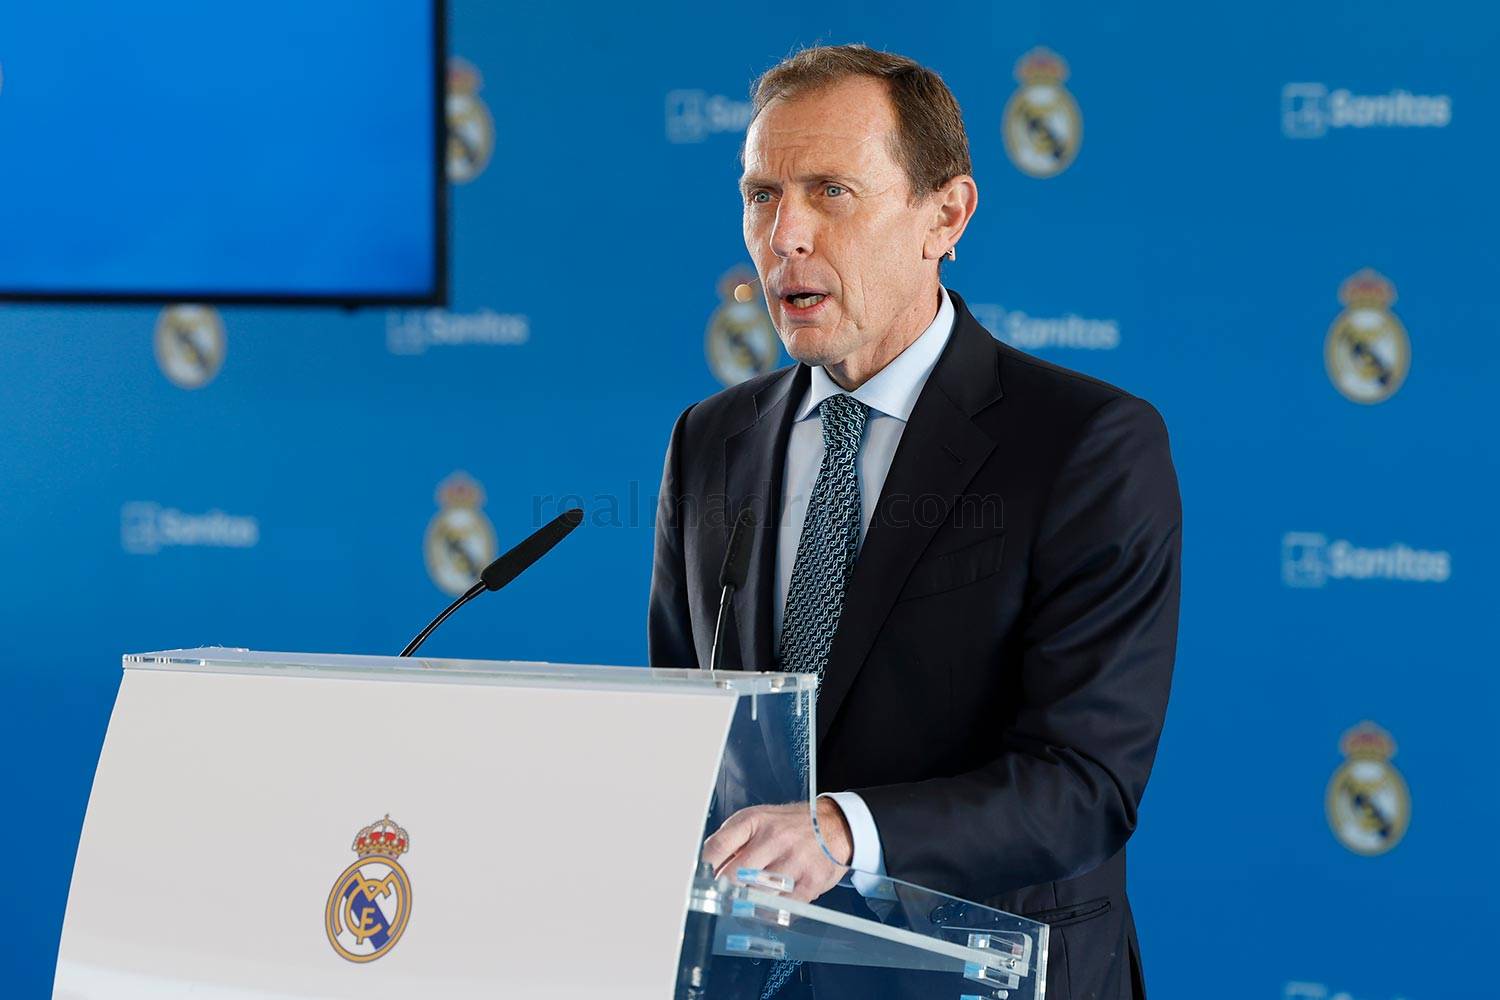 Real Madrid And Sanitas Celebrate 20 Years In Collaboration